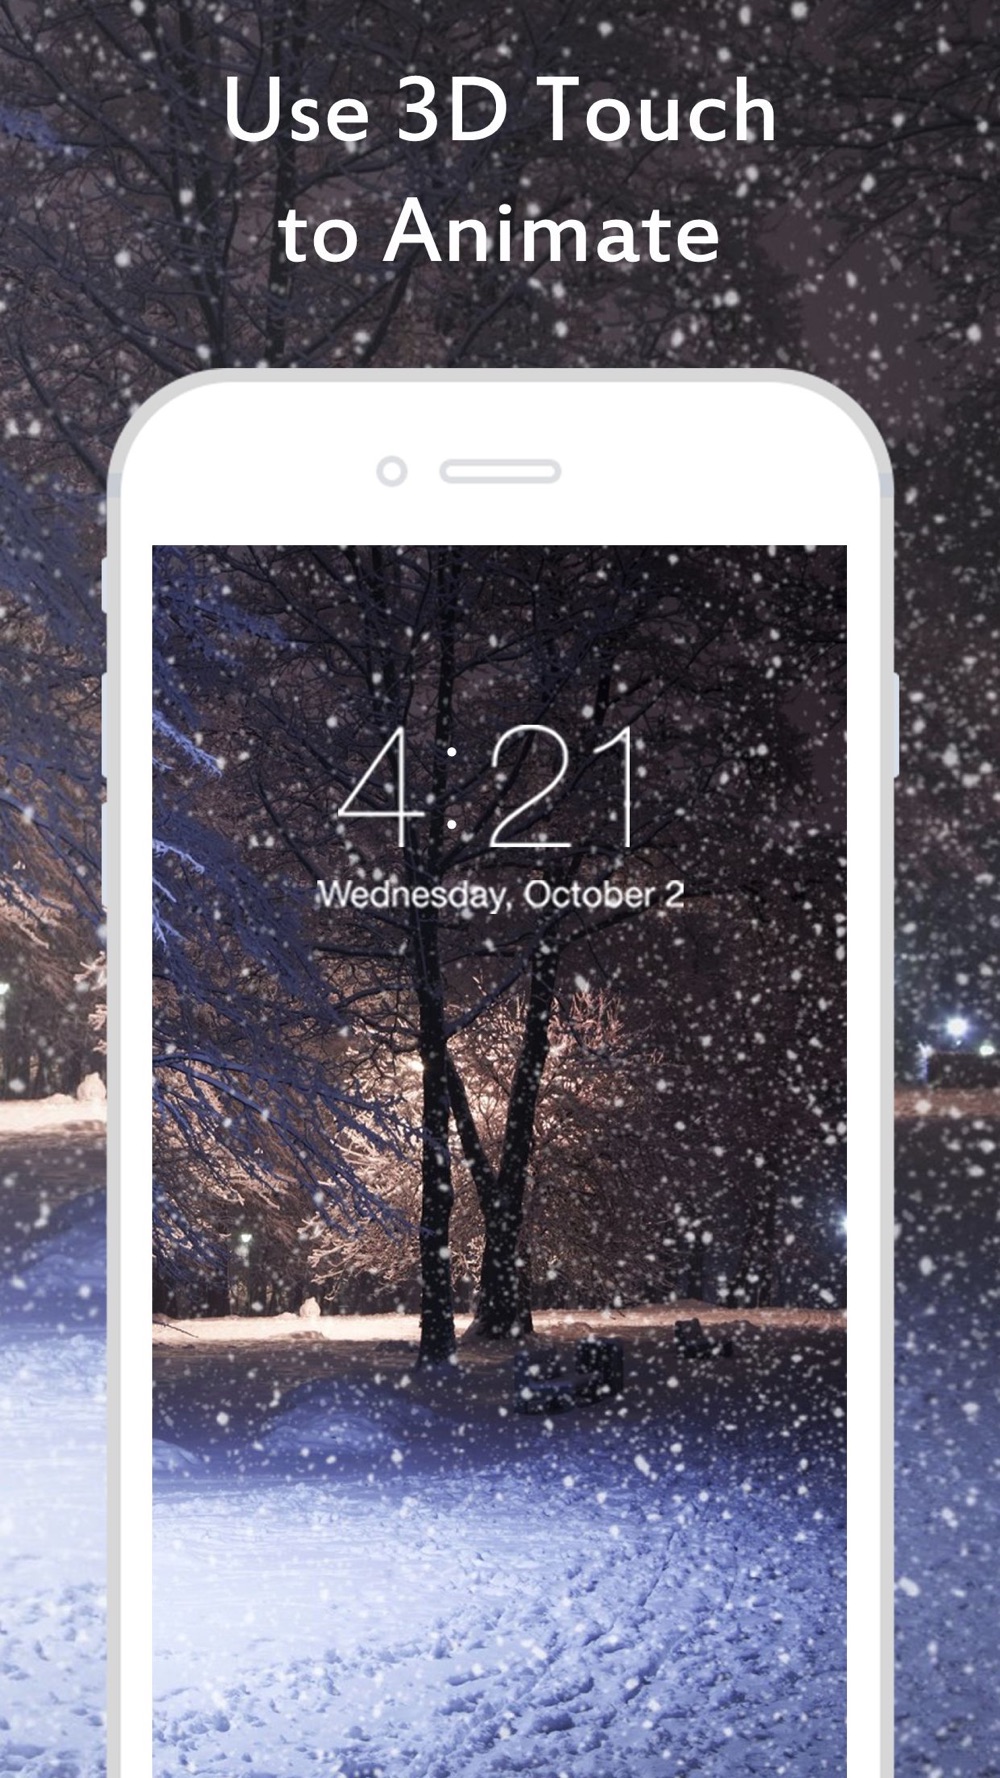 Snowfall Live Wallpapers - Animated Wallpapers For Home Screen Lock Screen  Download App for iPhone 